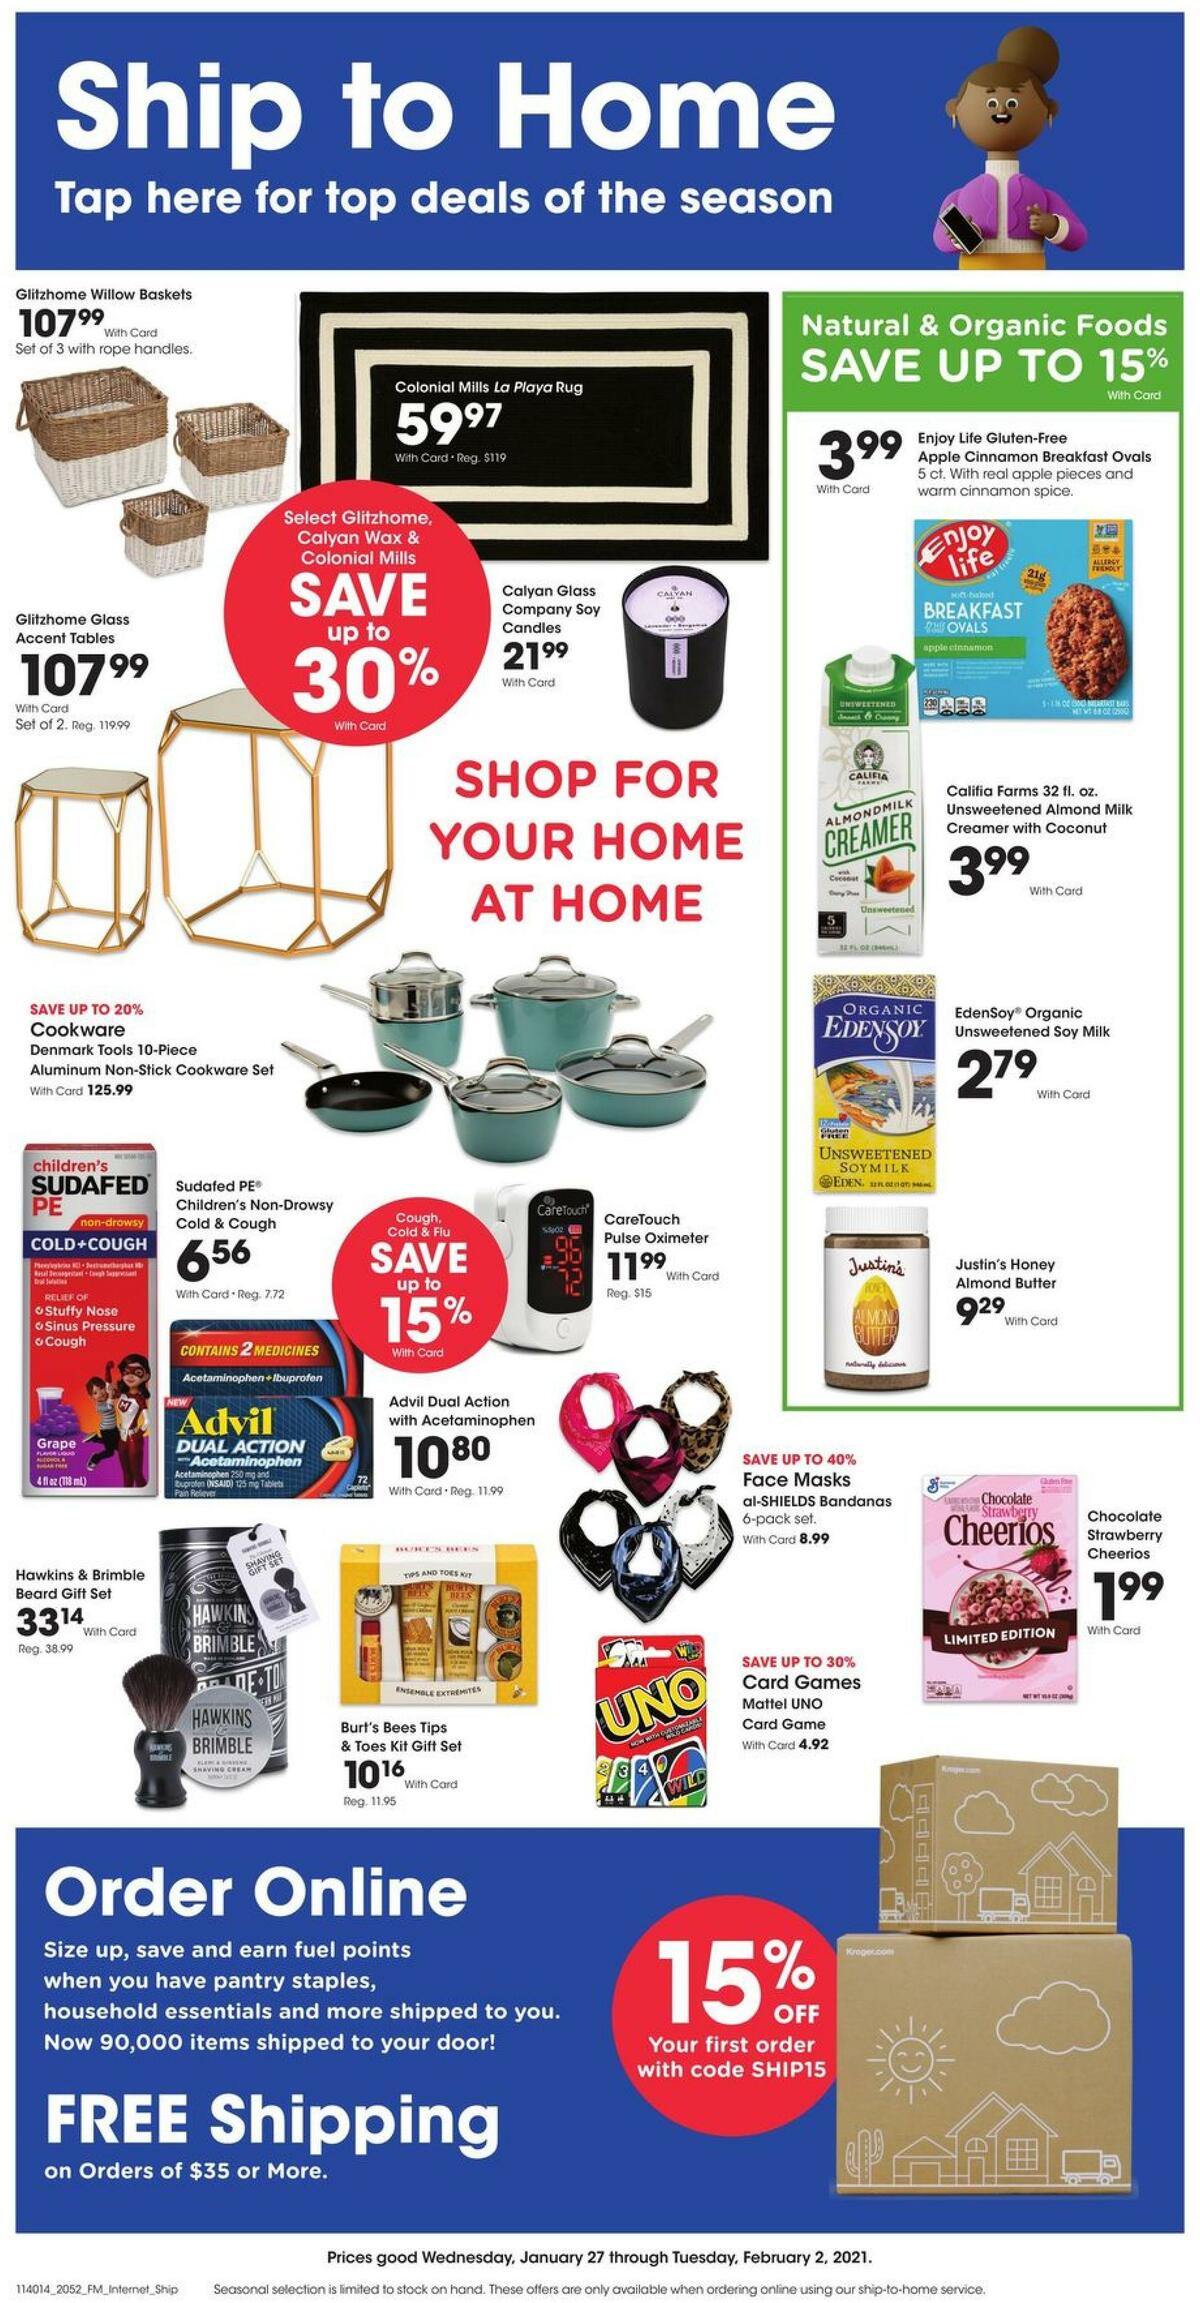 Kroger Ship to Home Weekly Ad from January 27